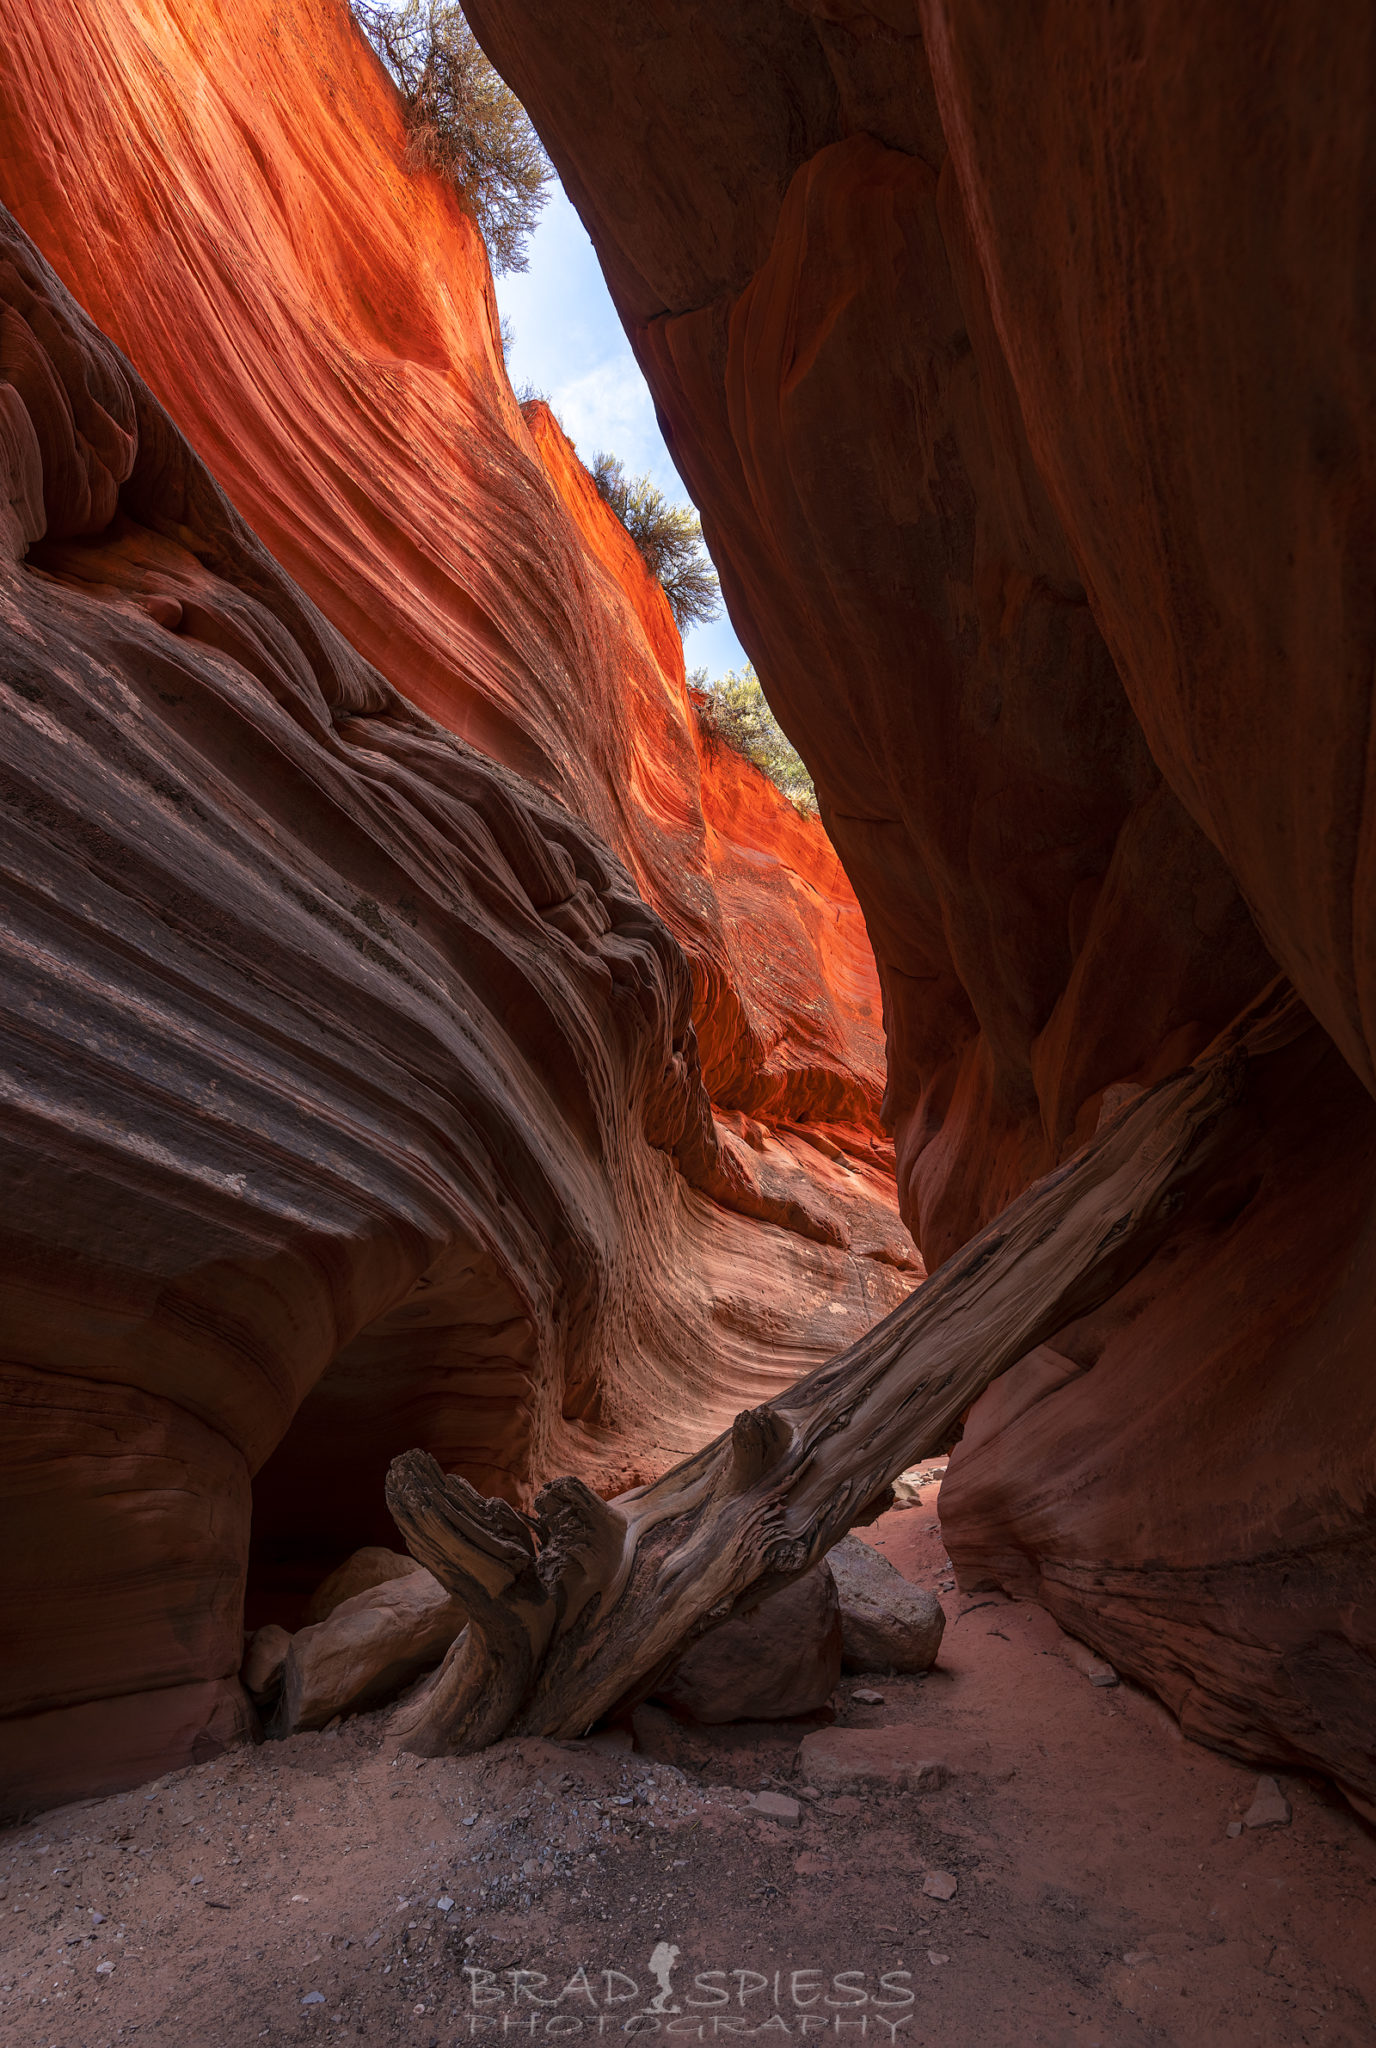 An old tree trunk forming a natural obstacle in Kanab's Peek-A-Boo slot canyon